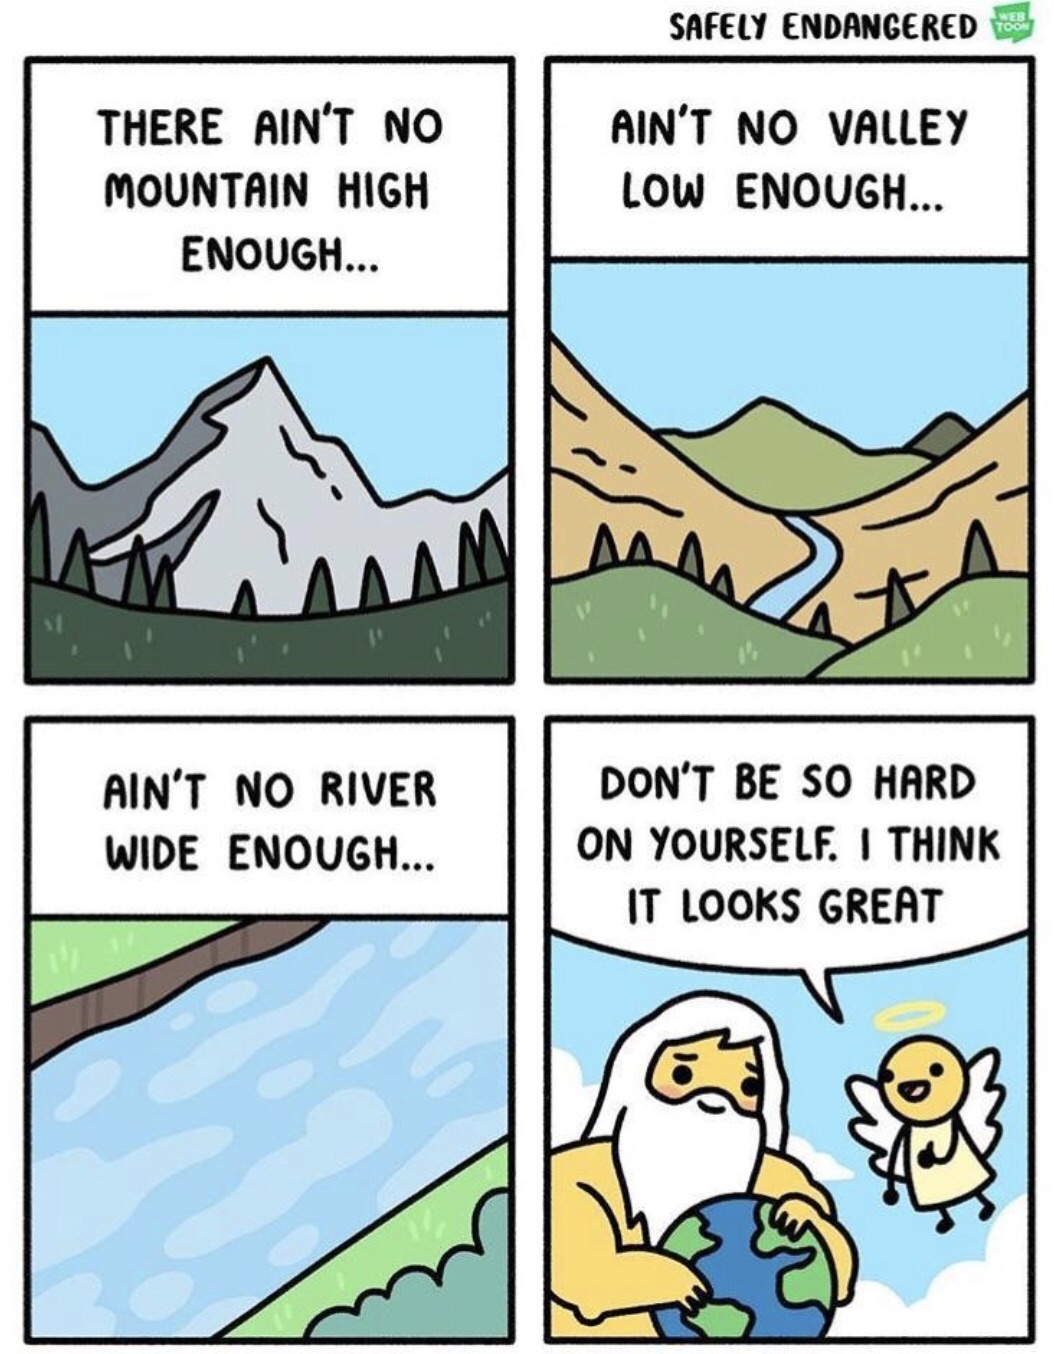 memes - ain t no valley meme - Safely Endangered To There Ain'T No Mountain High Enough... Ain'T No Valley Low Enough... Ain'T No River Wide Enough... Don'T Be So Hard On Yourself. I Think It Looks Great